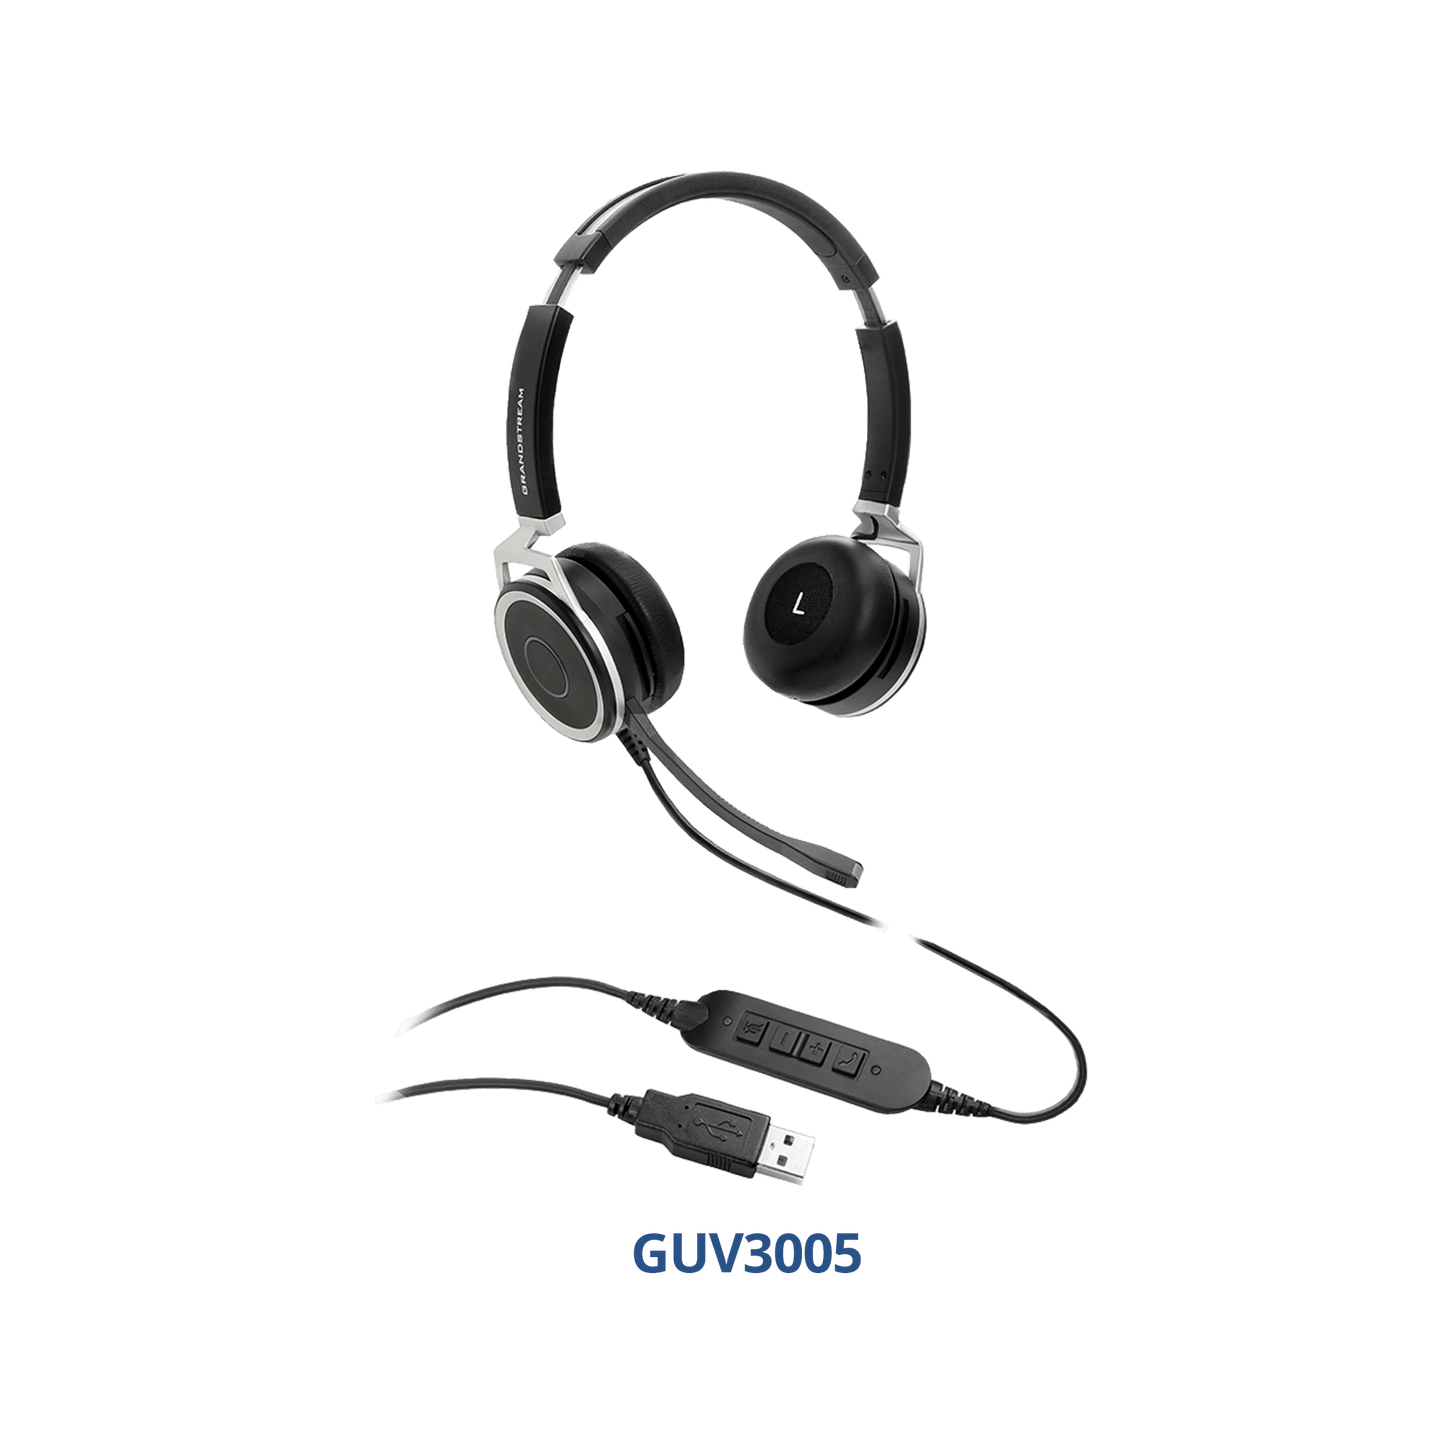 Grandstream HD USB Headsets with Noise Canceling Mic - GRANDSTREAM-GUV3005 New - GRANDSTREAM-GUV3005 - Reef Telecom